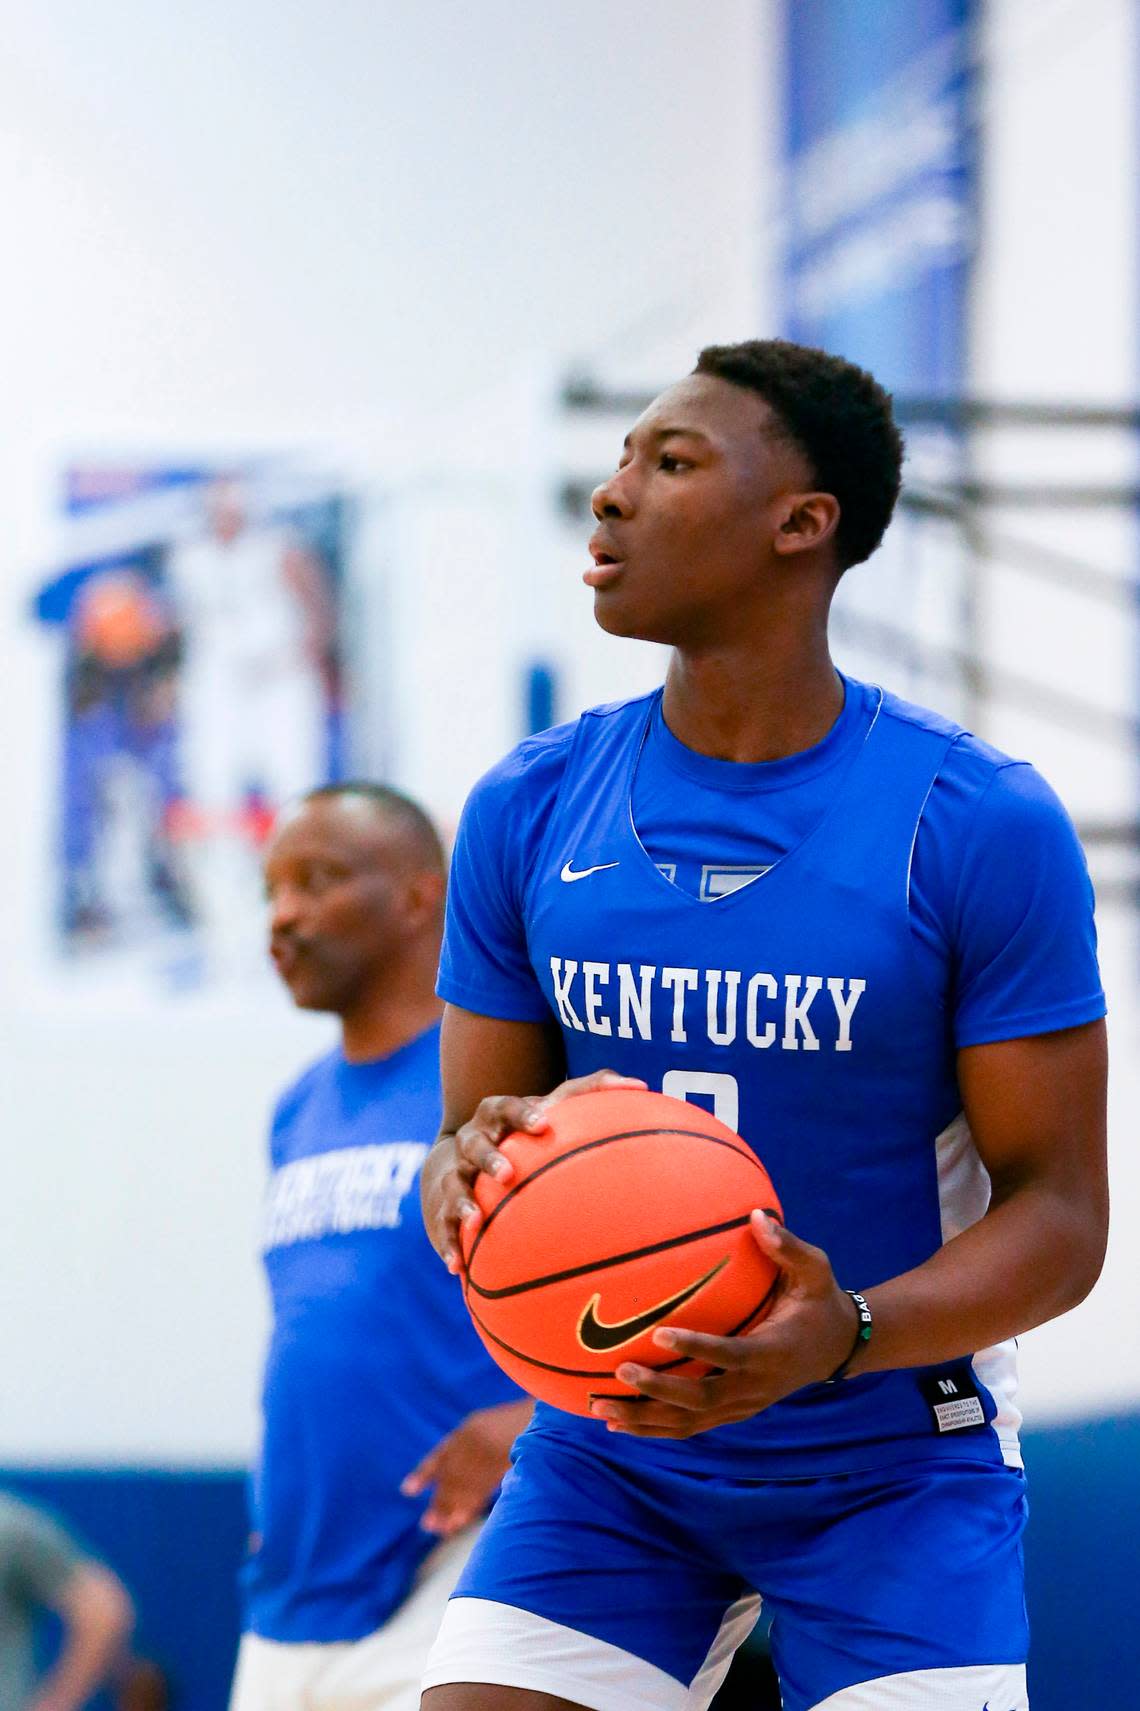 Adou Thiero is the youngest player on UK’s roster for 2022-23. “I came in thinking everyone gets their chance,” he said. “So when I get mine, I’m going to show my skill.”